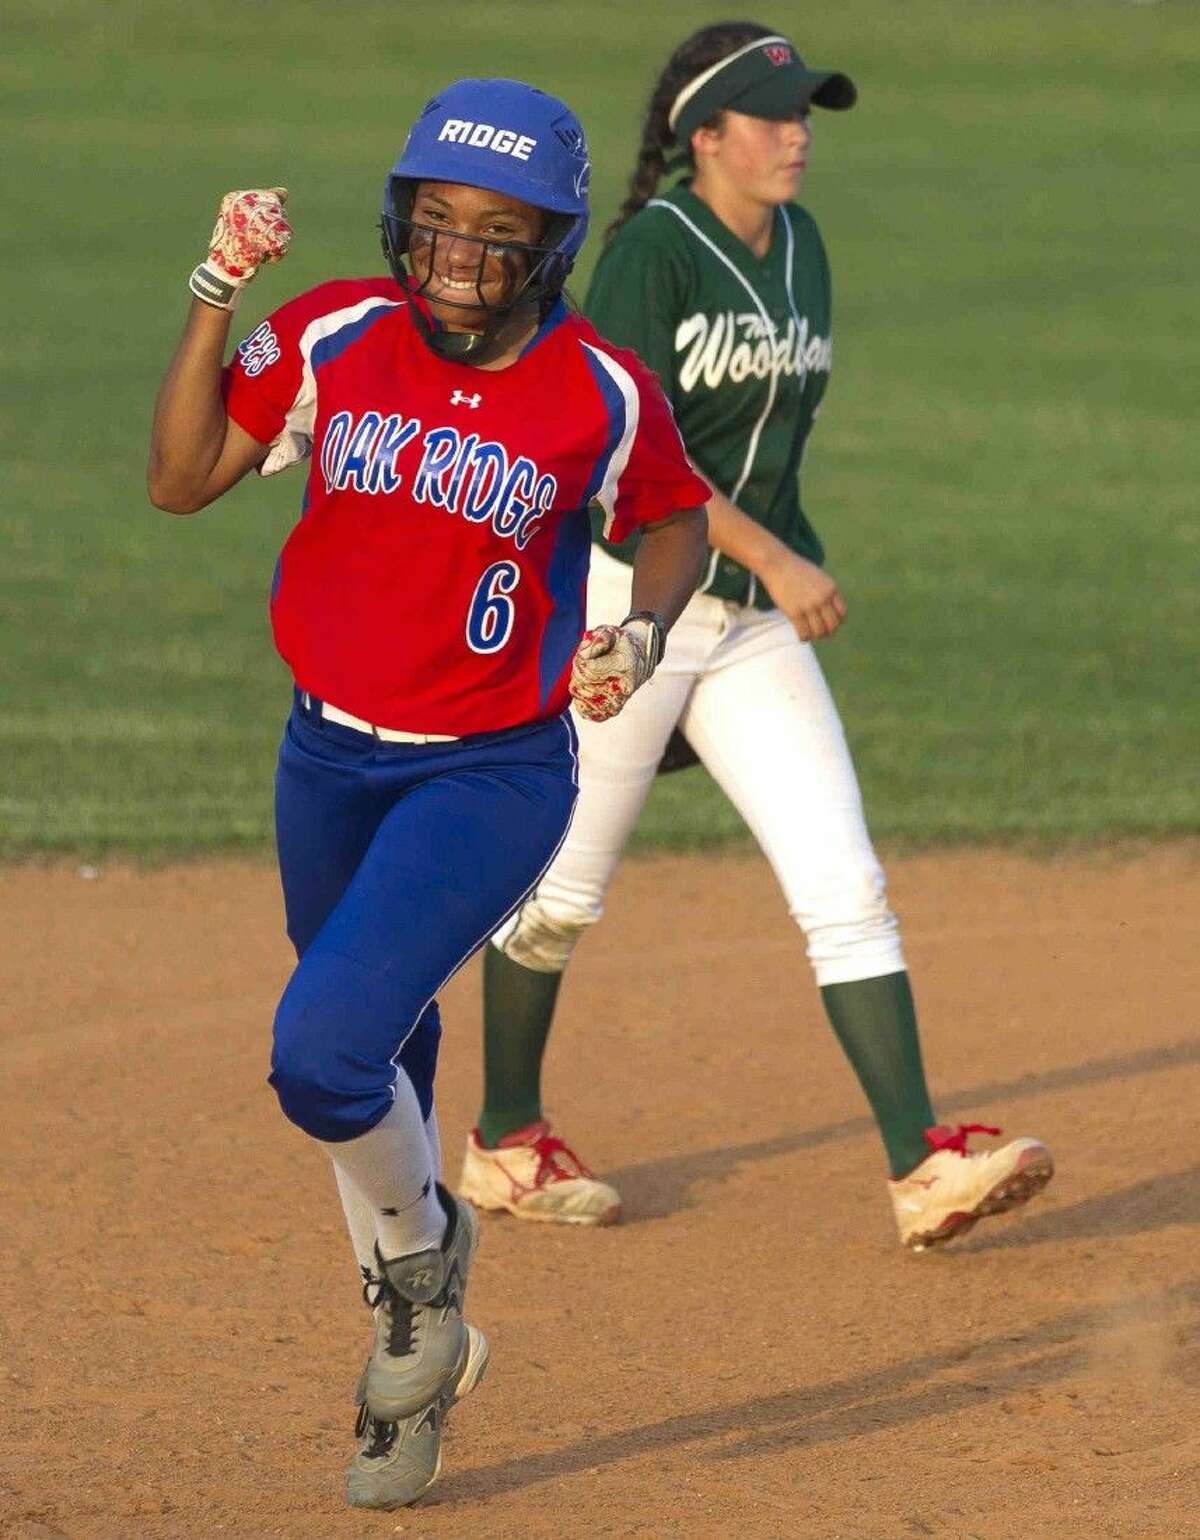 Oak Ridge’s Aiyana Freeney celebrates after hitting a three-run home run in the second inning of a District 16-6A softball game Tuesday. Go to HCNpics.com to purchase this photo and others like it.